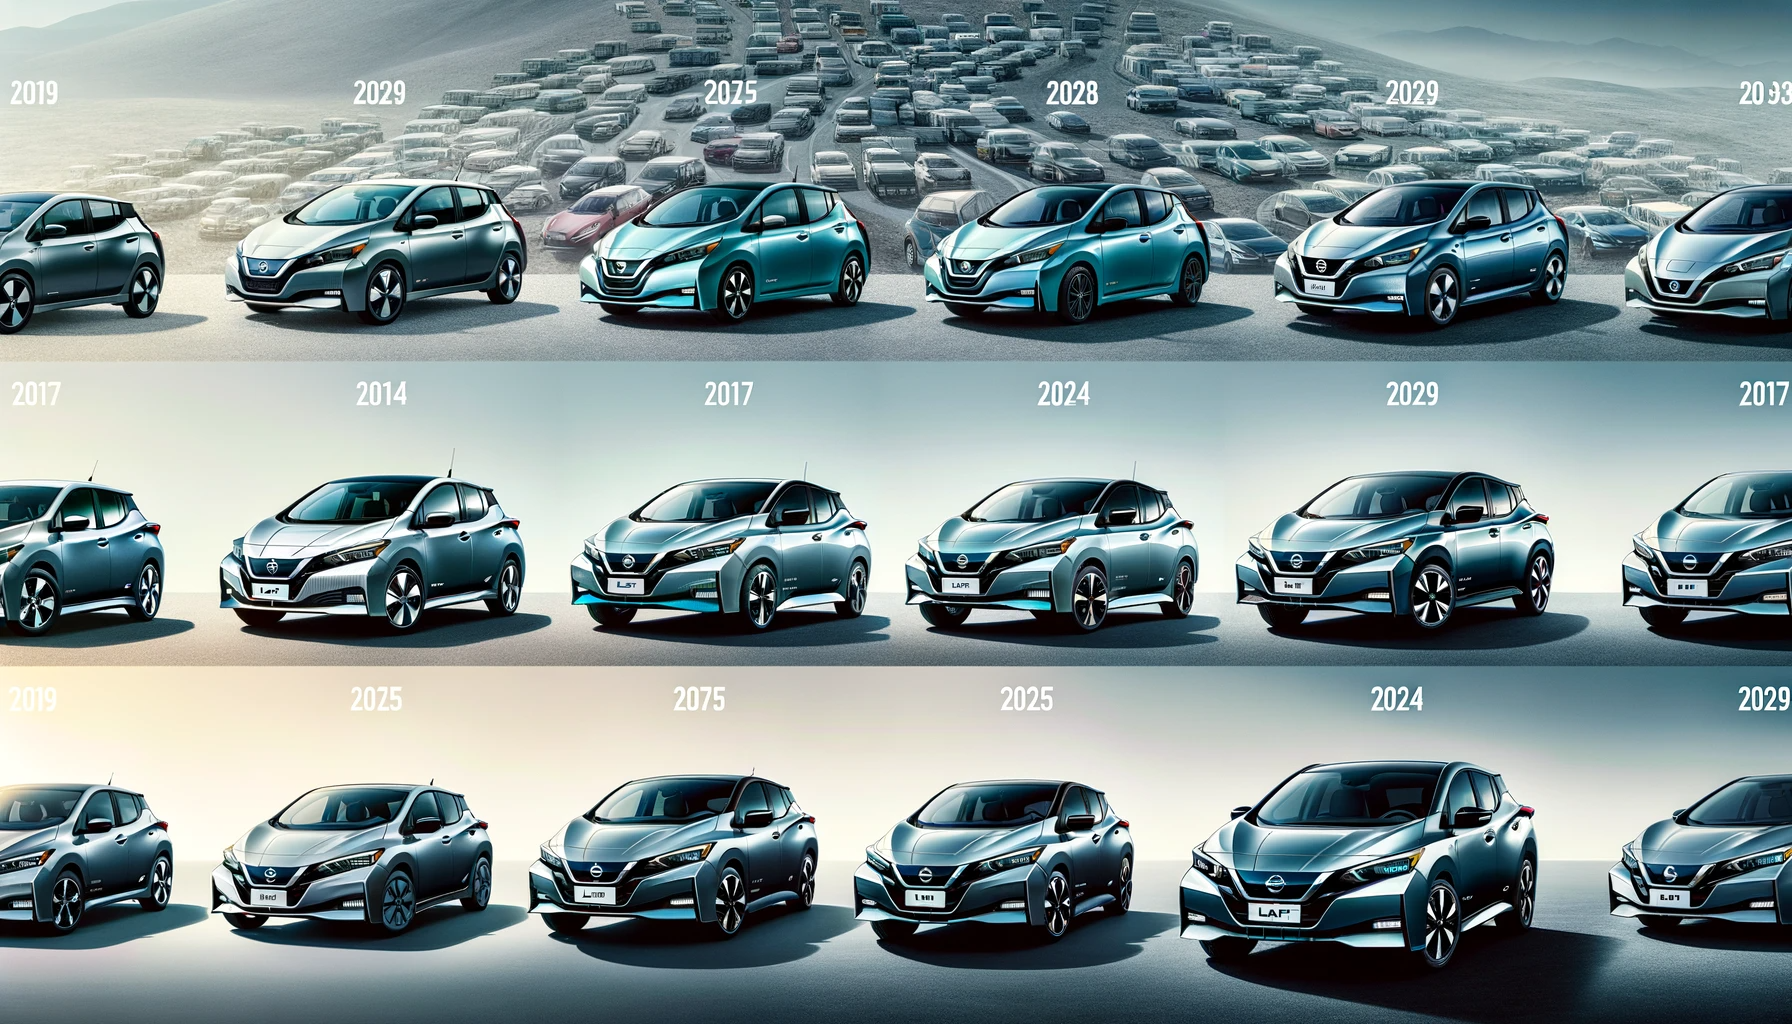 Nissan Leafs Evolution Over the Years